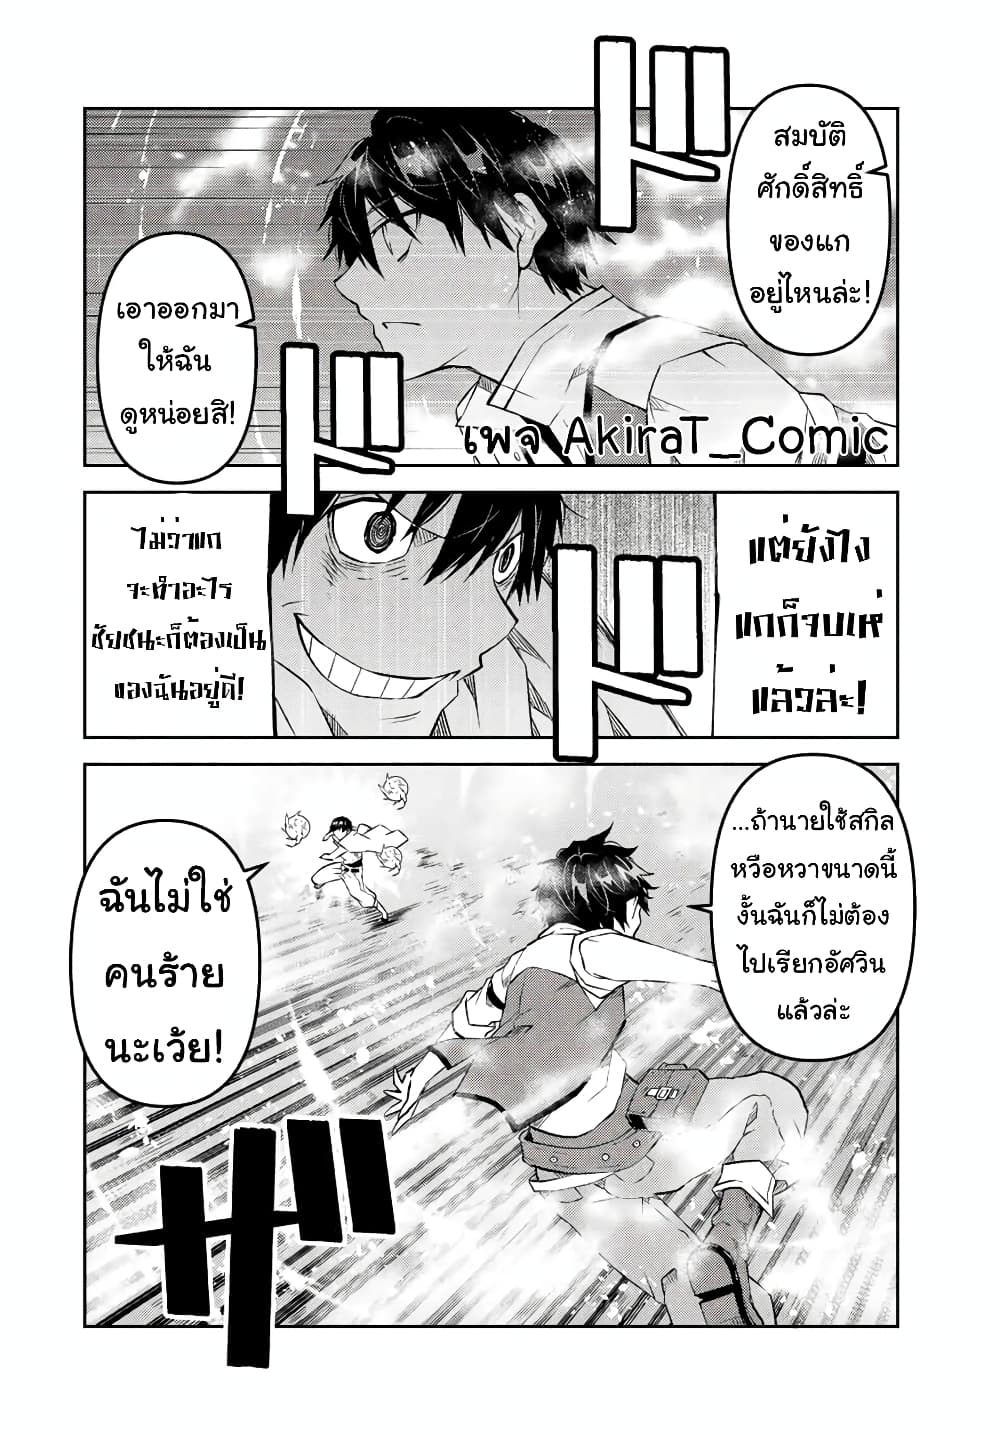 The Weakest Occupation "Blacksmith", but It's Actually the Strongest ช่างตีเหล็กอาชีพกระจอก? 86-86